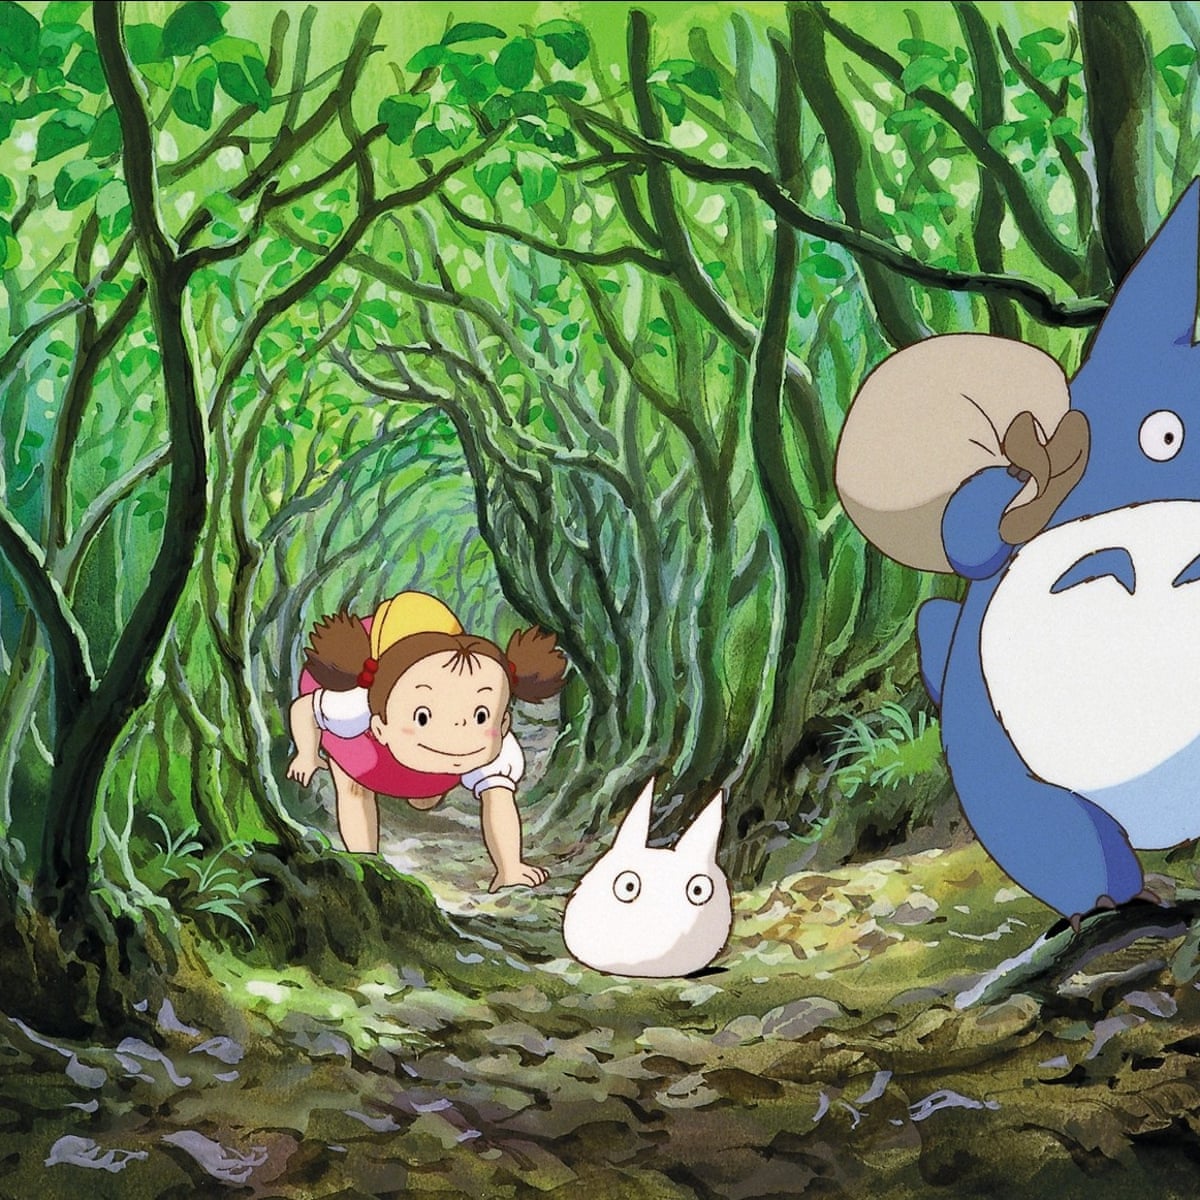 Streaming Our Guide To Ghibli As The Collection Hits Netflix Studio Ghibli The Guardian